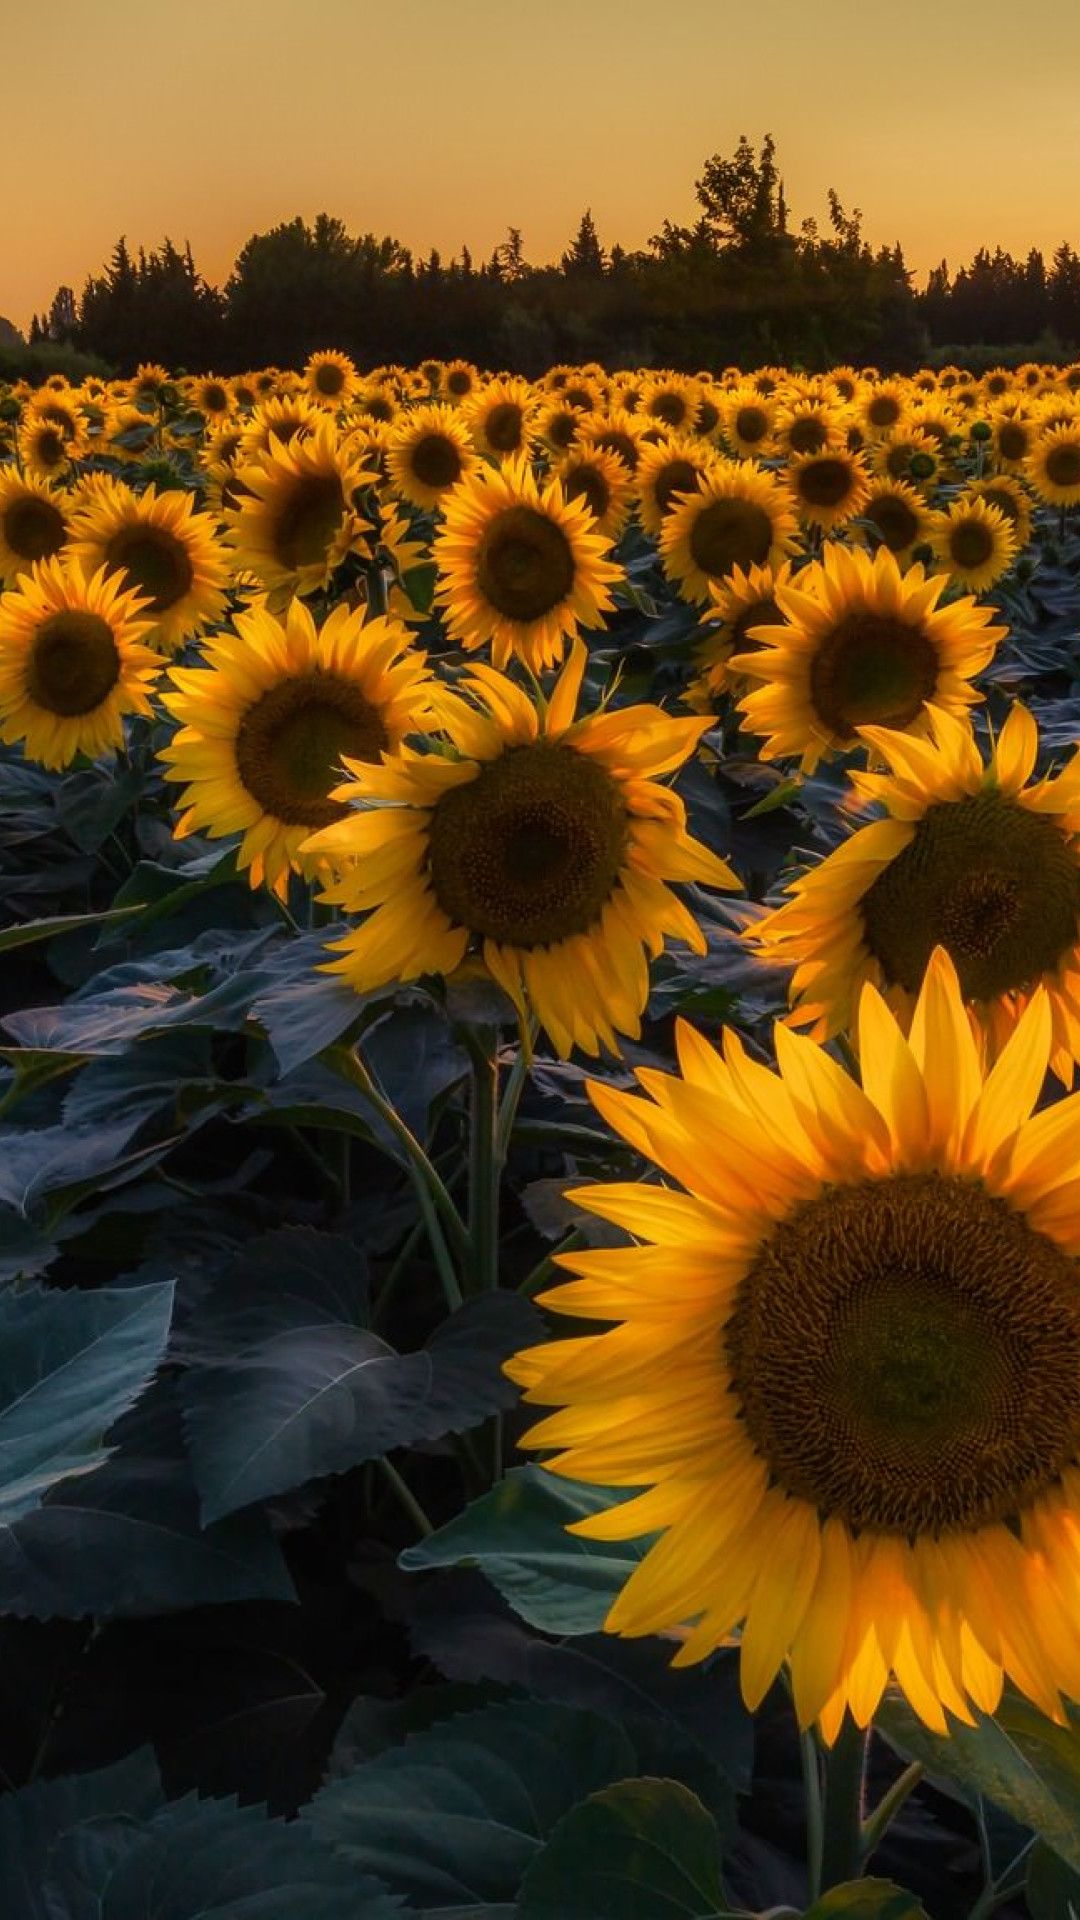 Sunflower iPhone Wallpapers   Top Free Sunflower iPhone